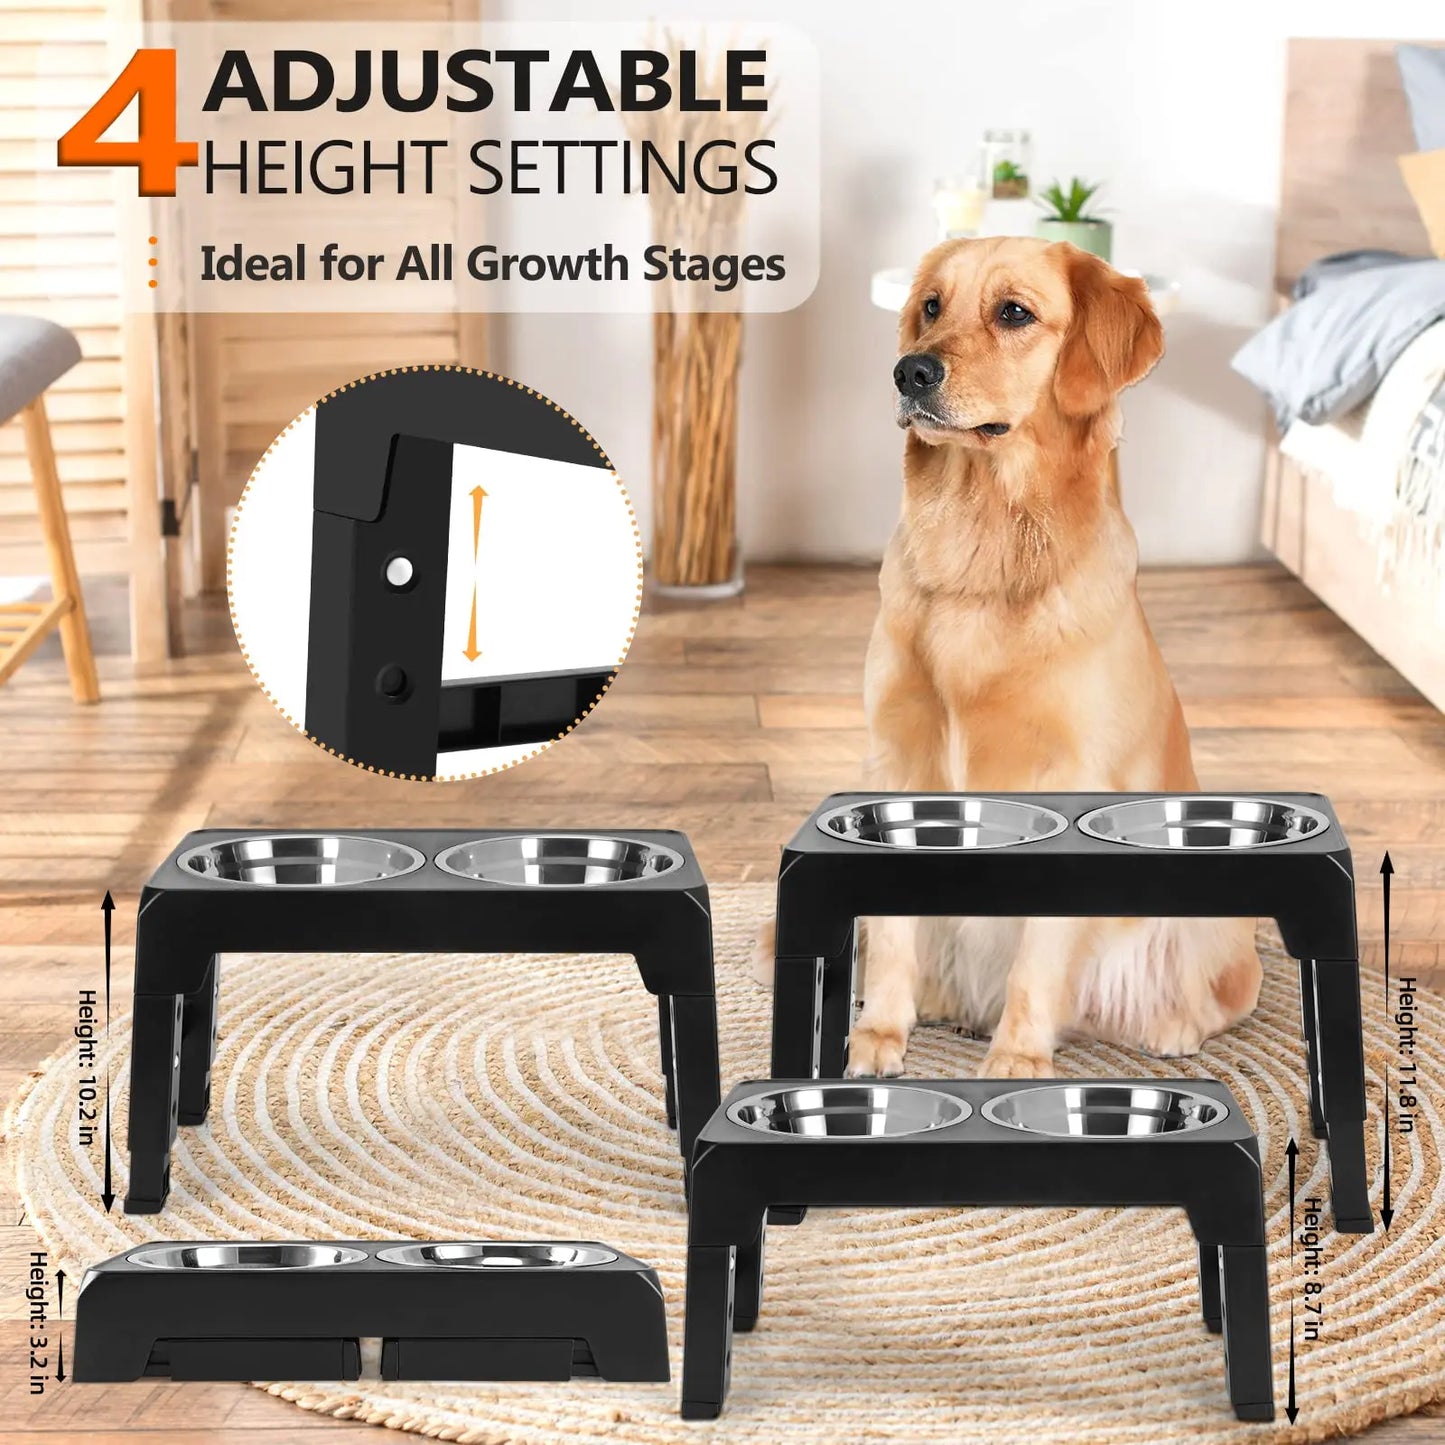 Elevated Dog Feeder Dogs Bowls Adjustable Raised Stand with Double